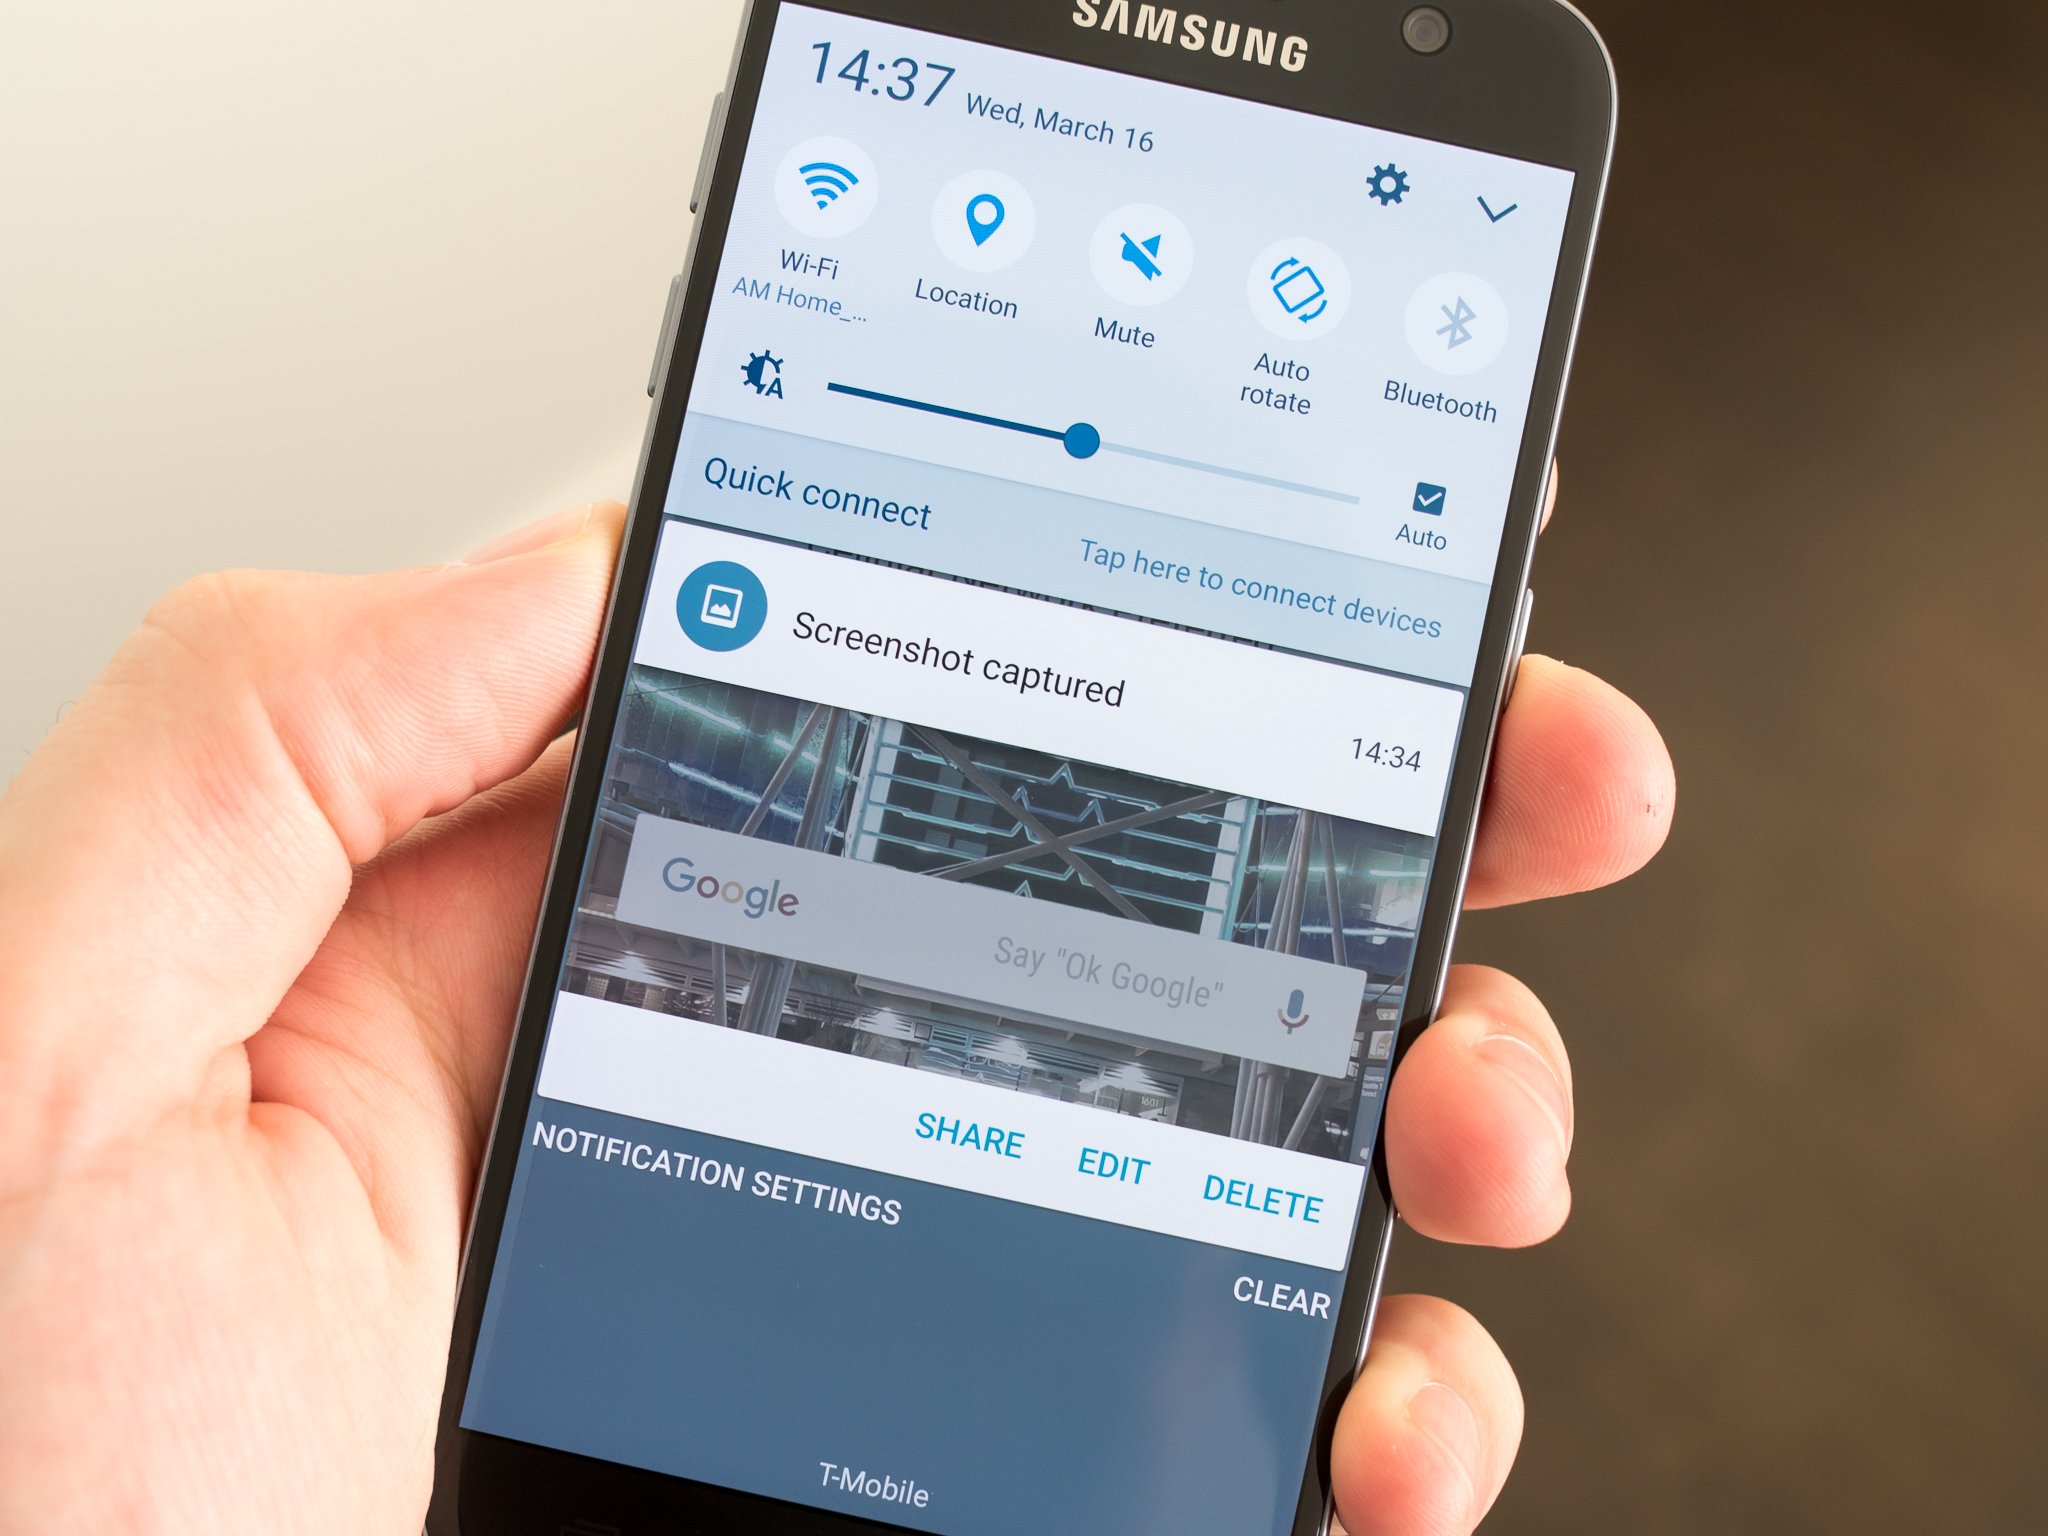 How to take a screenshot on the Samsung Galaxy S7